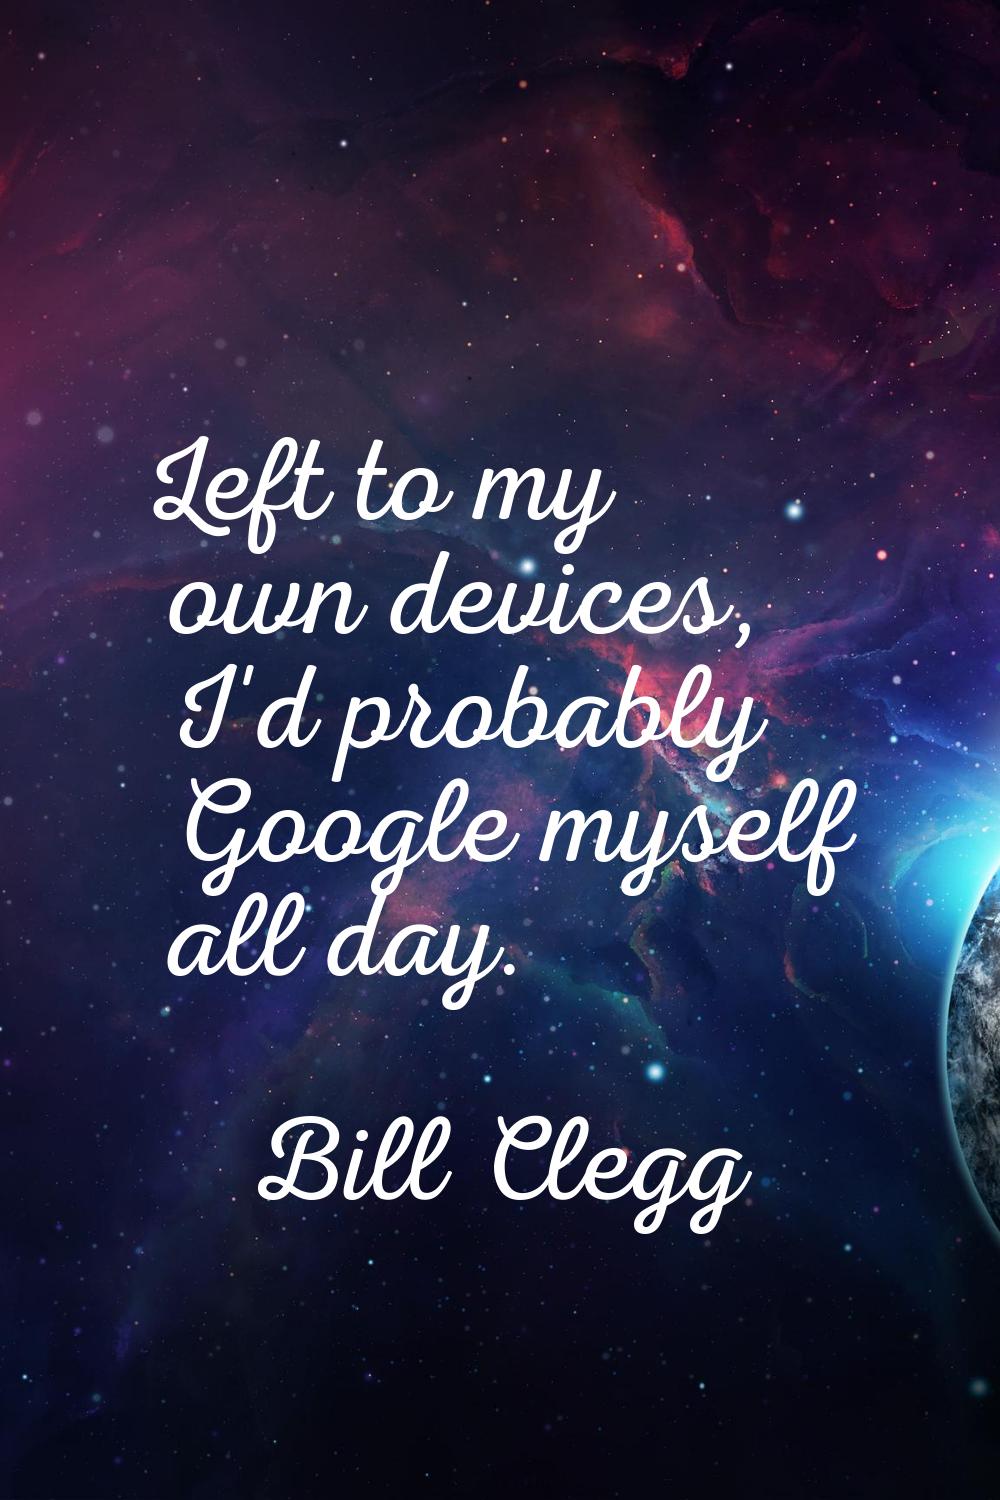 Left to my own devices, I'd probably Google myself all day.